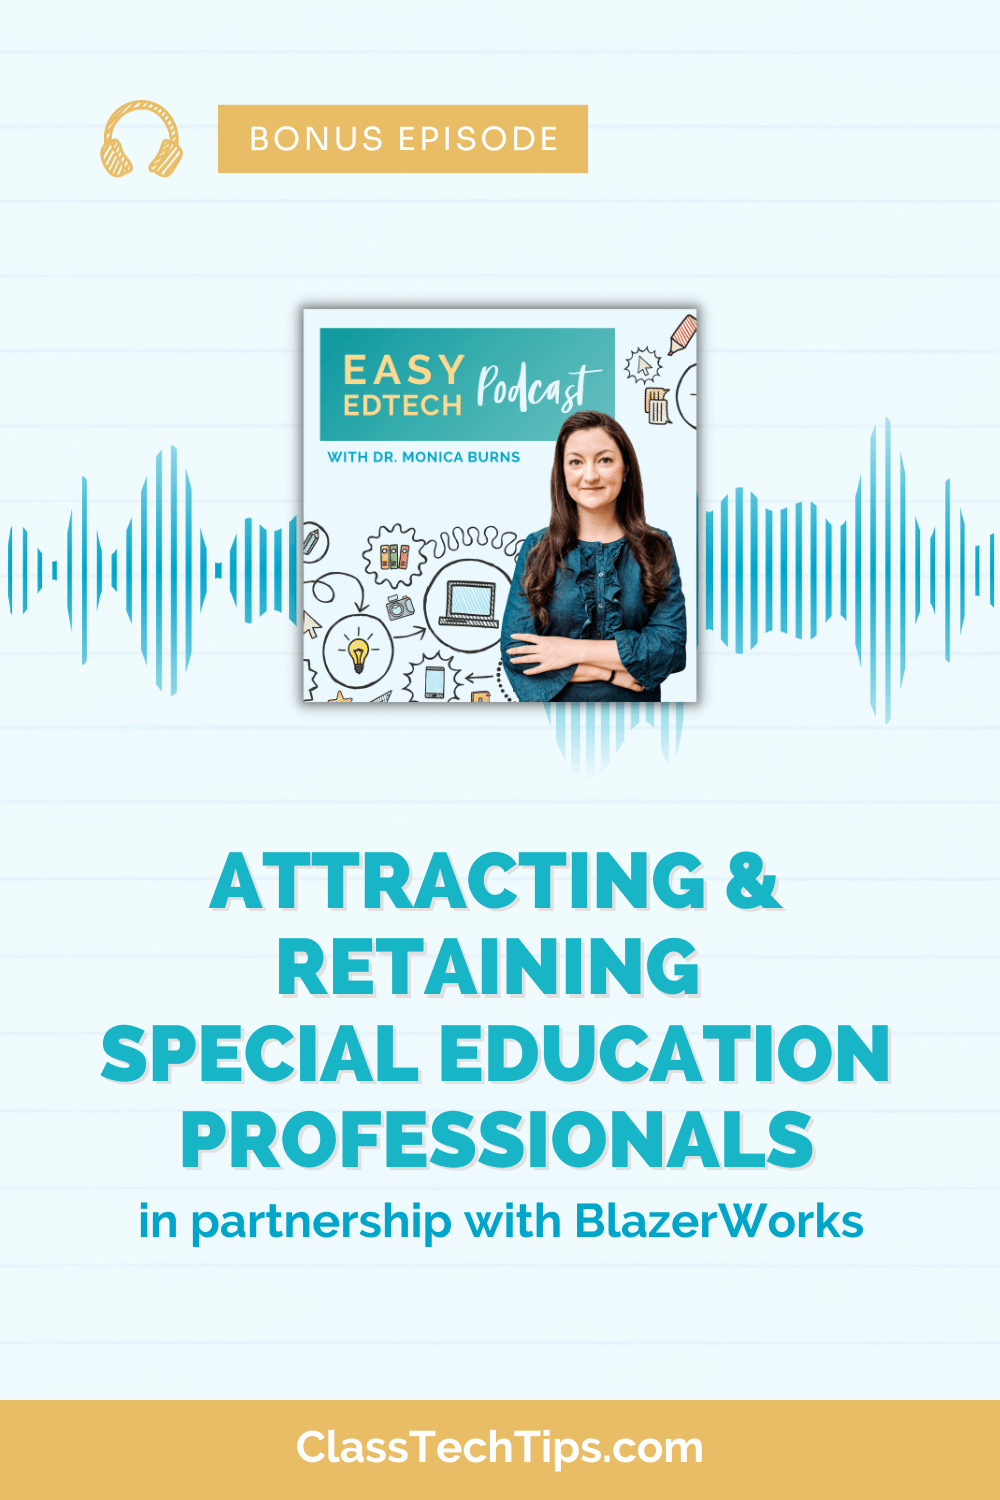 Podcast logo and blue soundwaves symbolizing the episode with Erin Hoganson, focusing on strategies to attract and retain special education professionals.